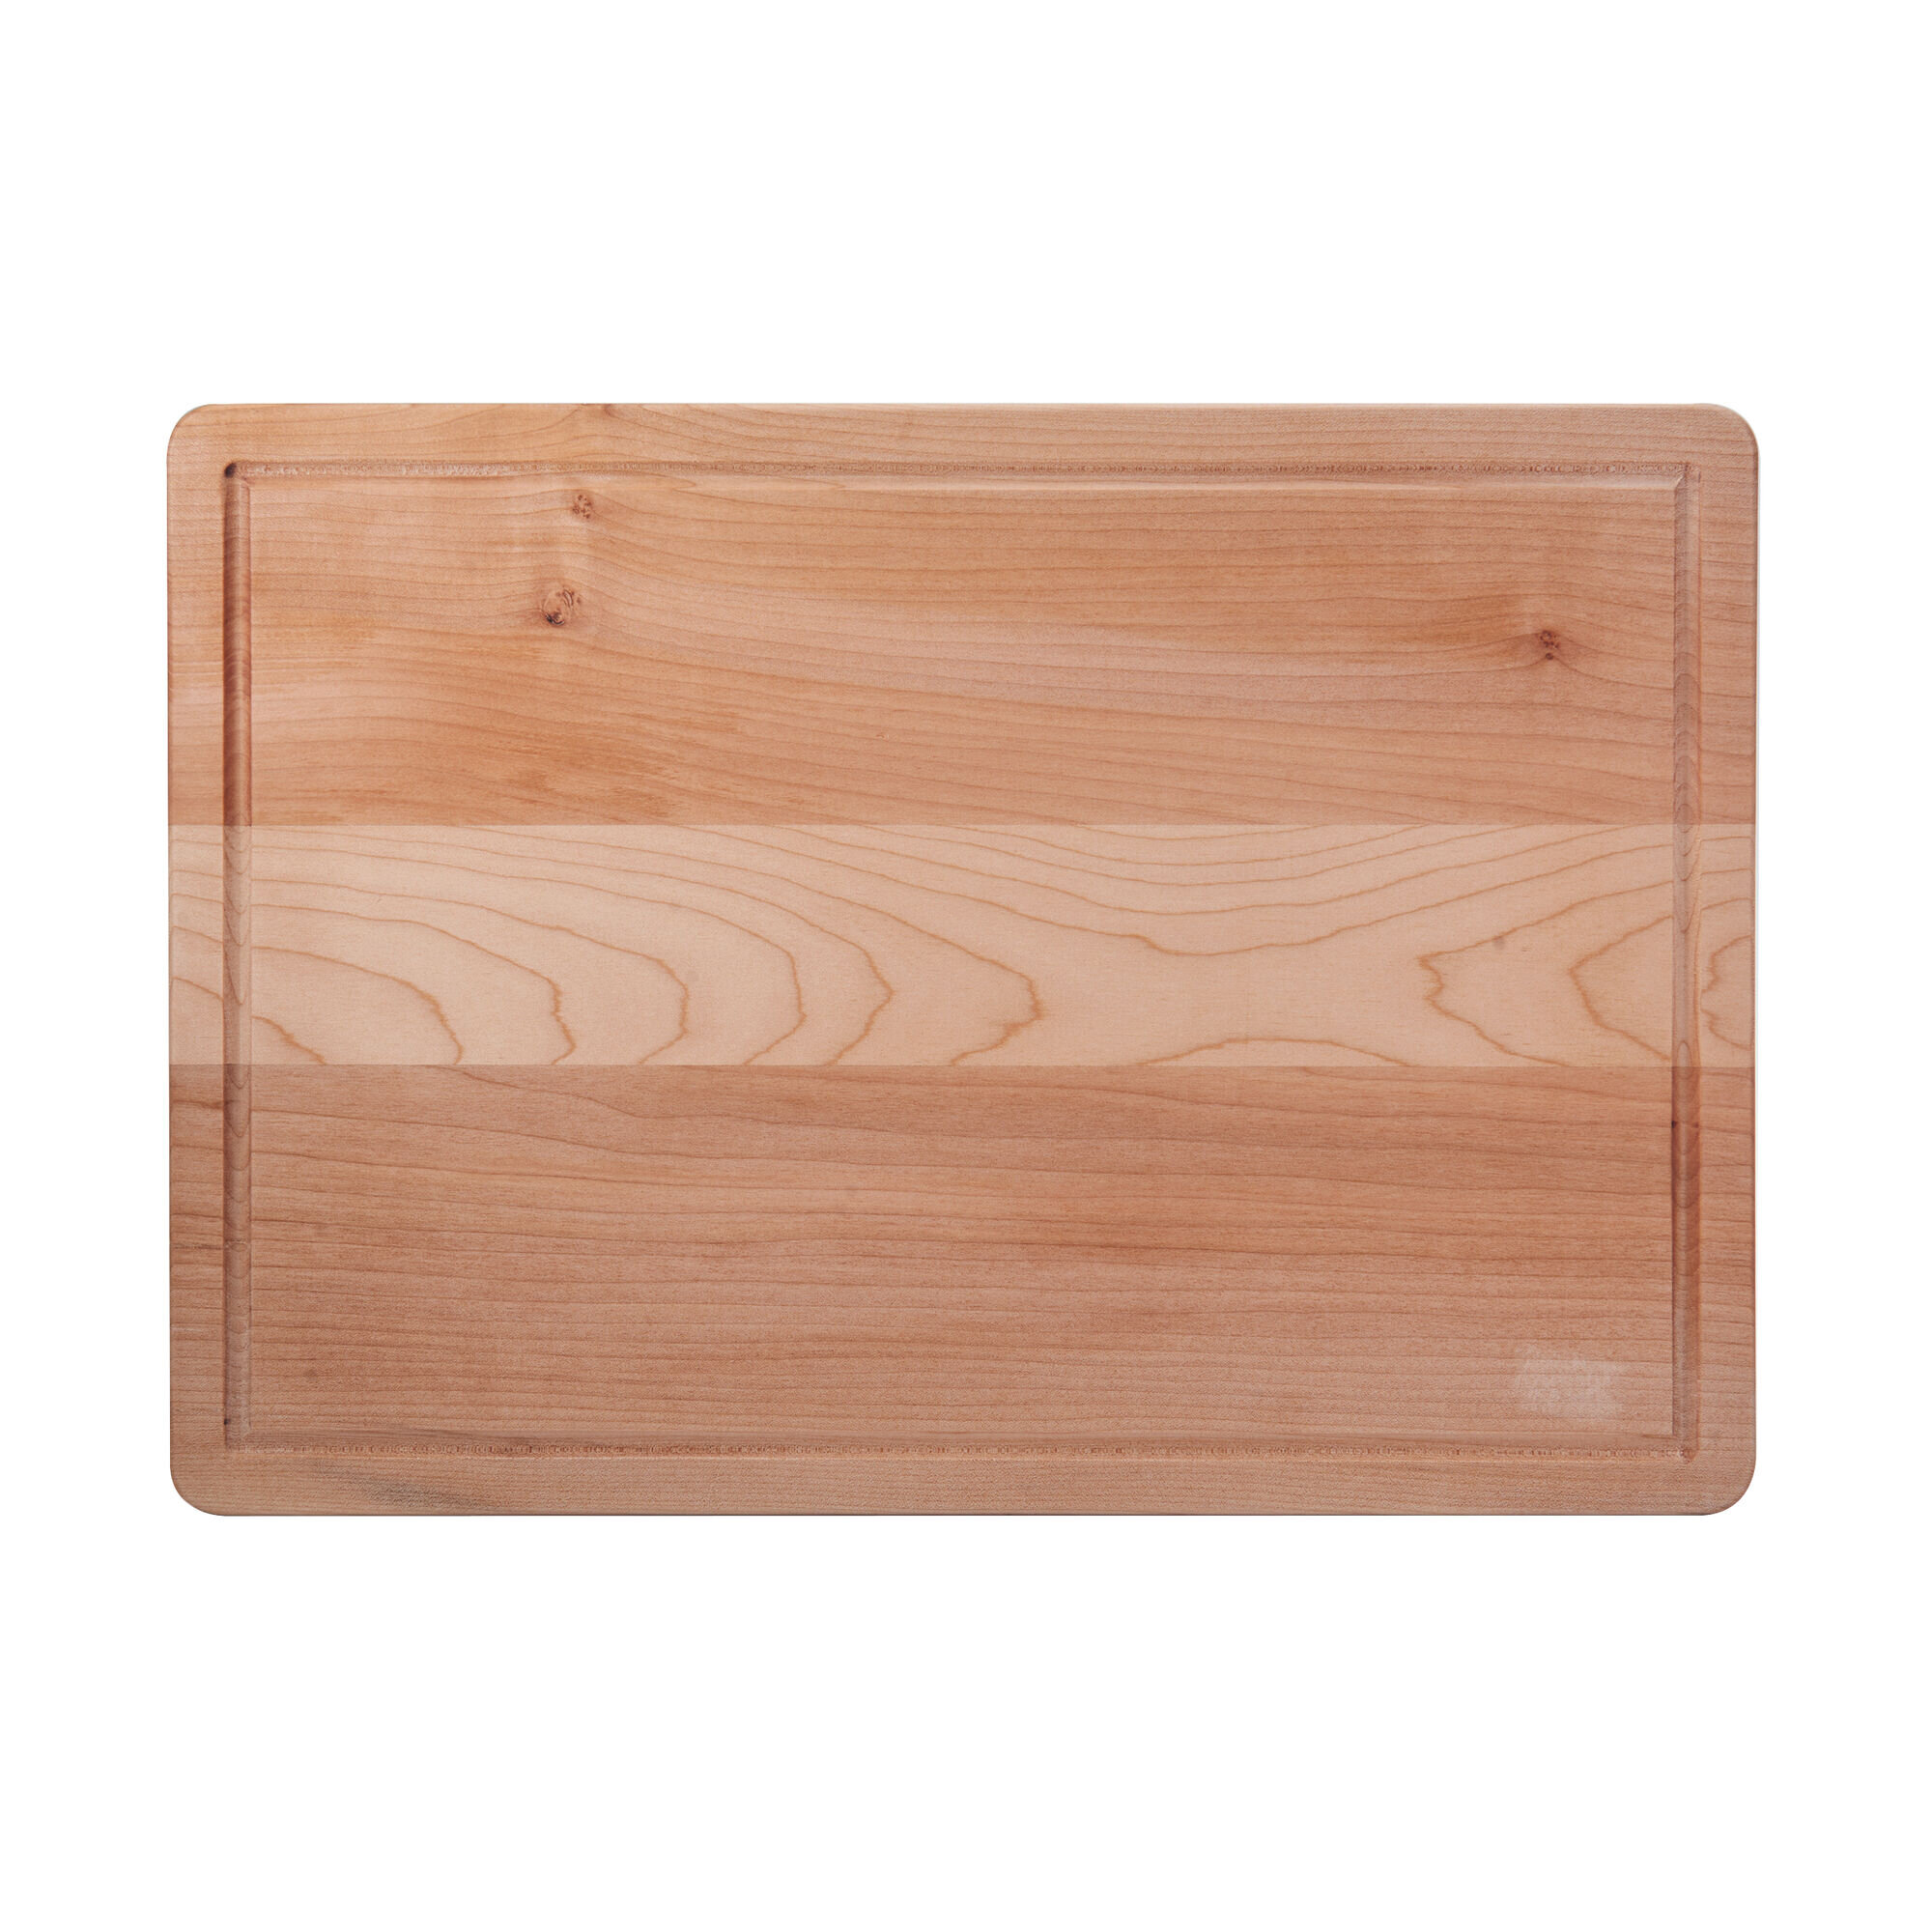 OXO GG 3 PC EVERYDAY CUTTING BOARD SET & Reviews